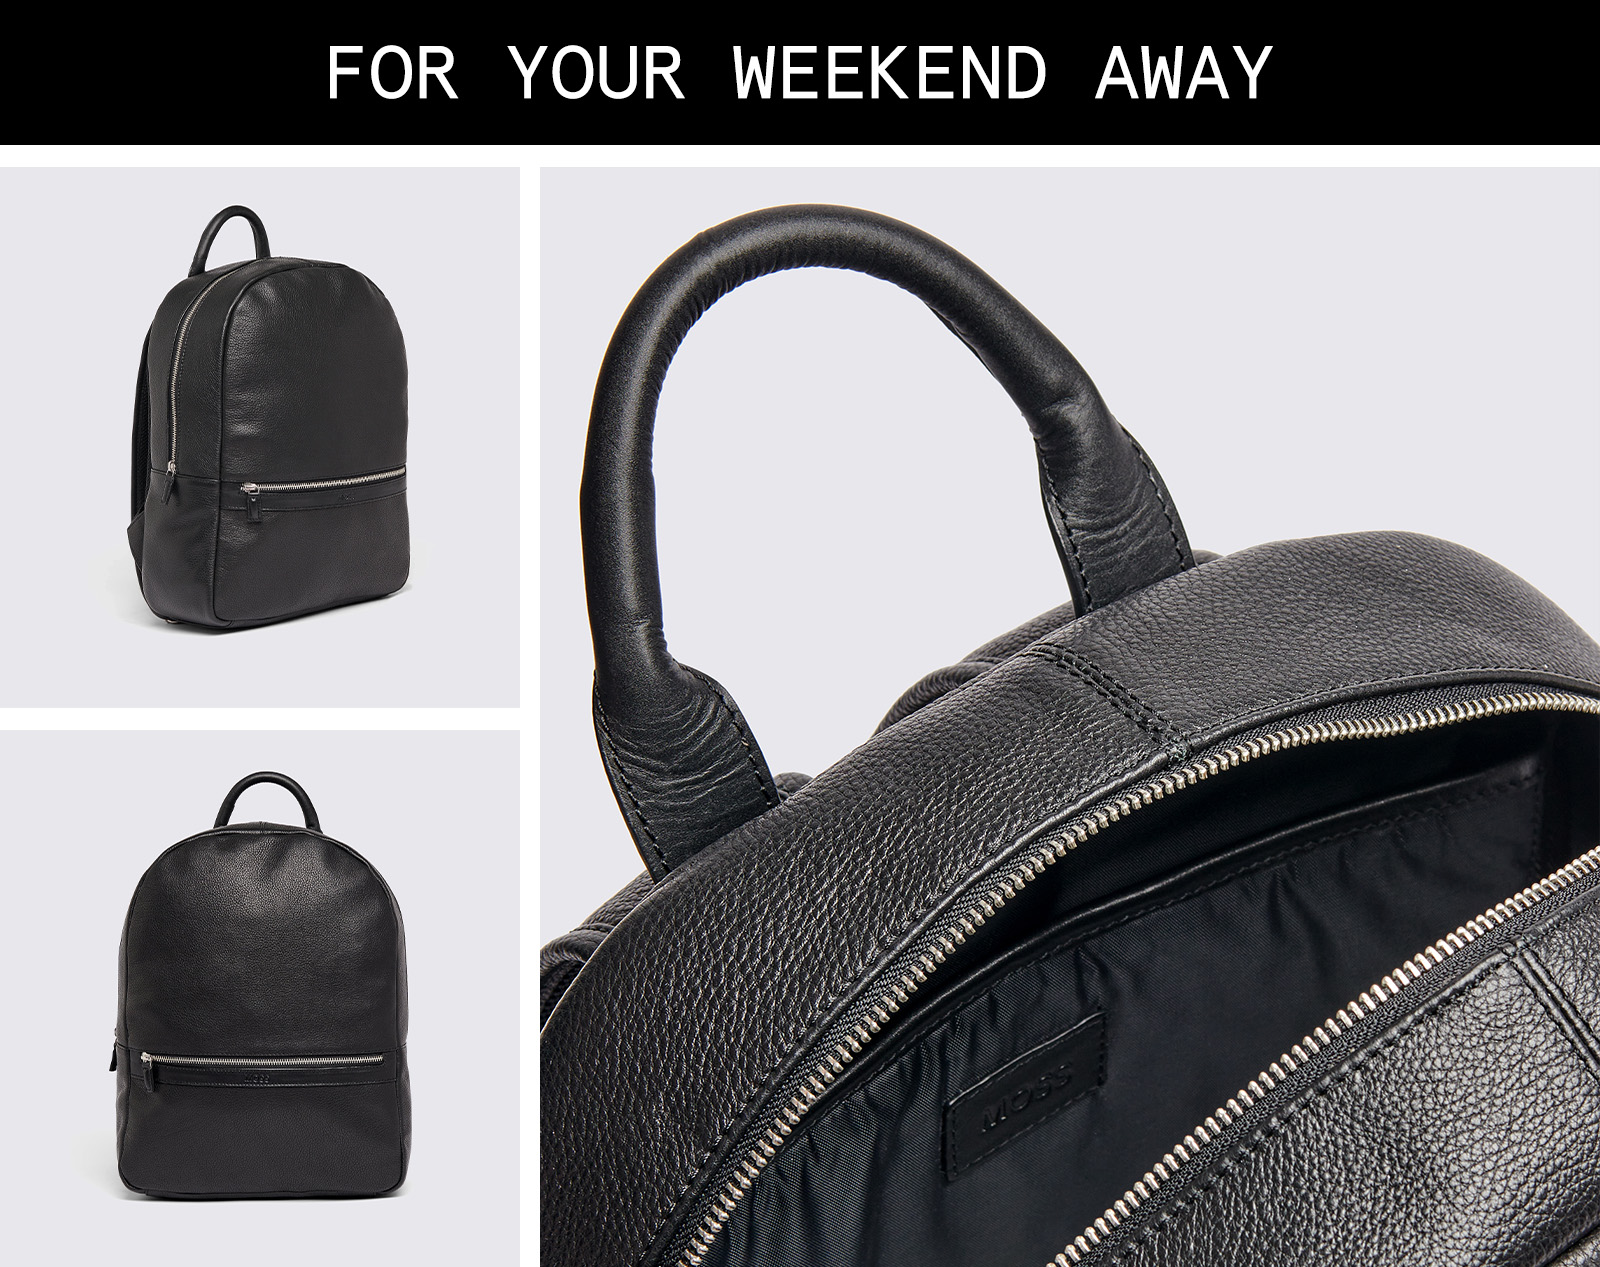 Moss - black grained leather backpack